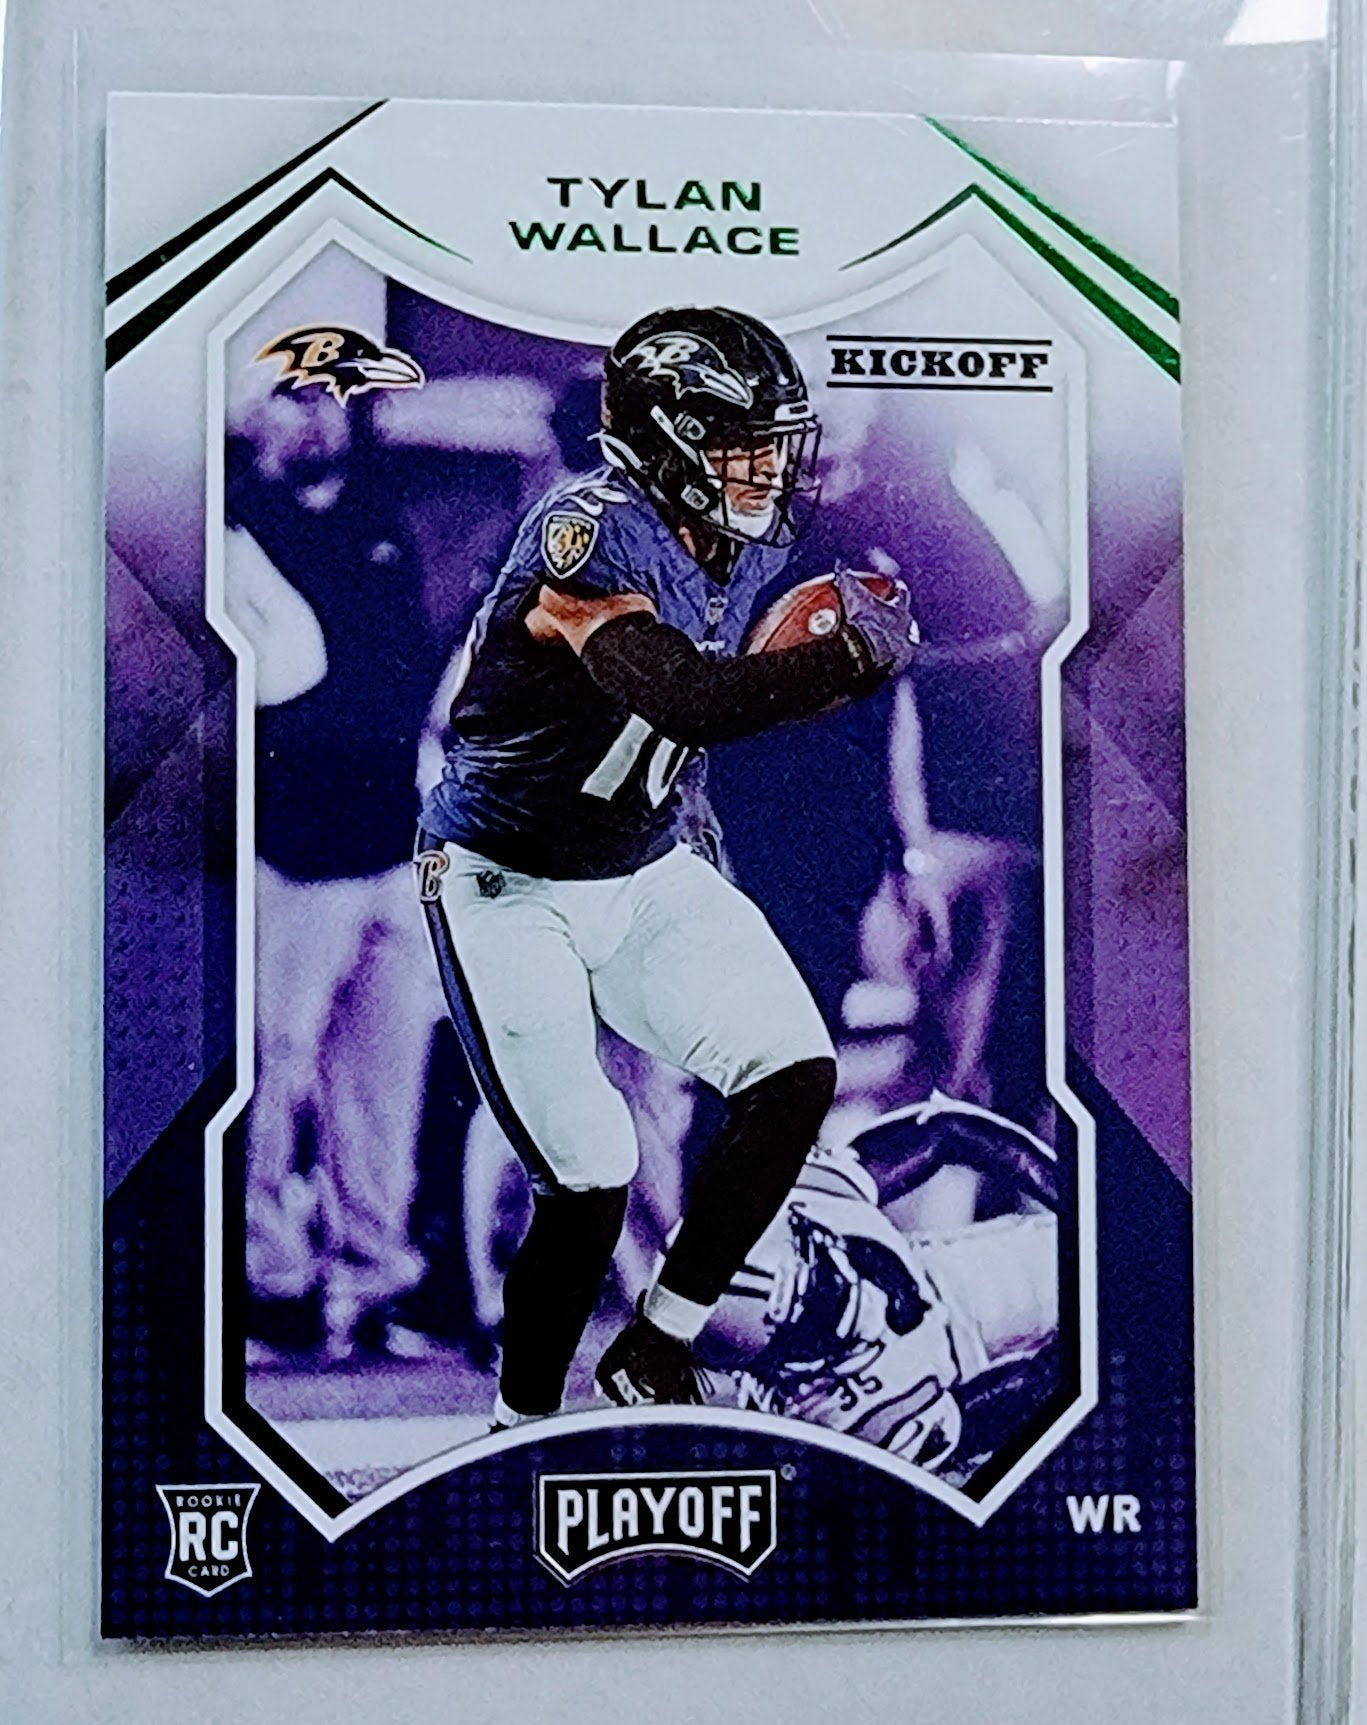 2021 Panini Playoff Tylan Wallace Kickoff Green Insert Rookie Football Card AVM1 simple Xclusive Collectibles   